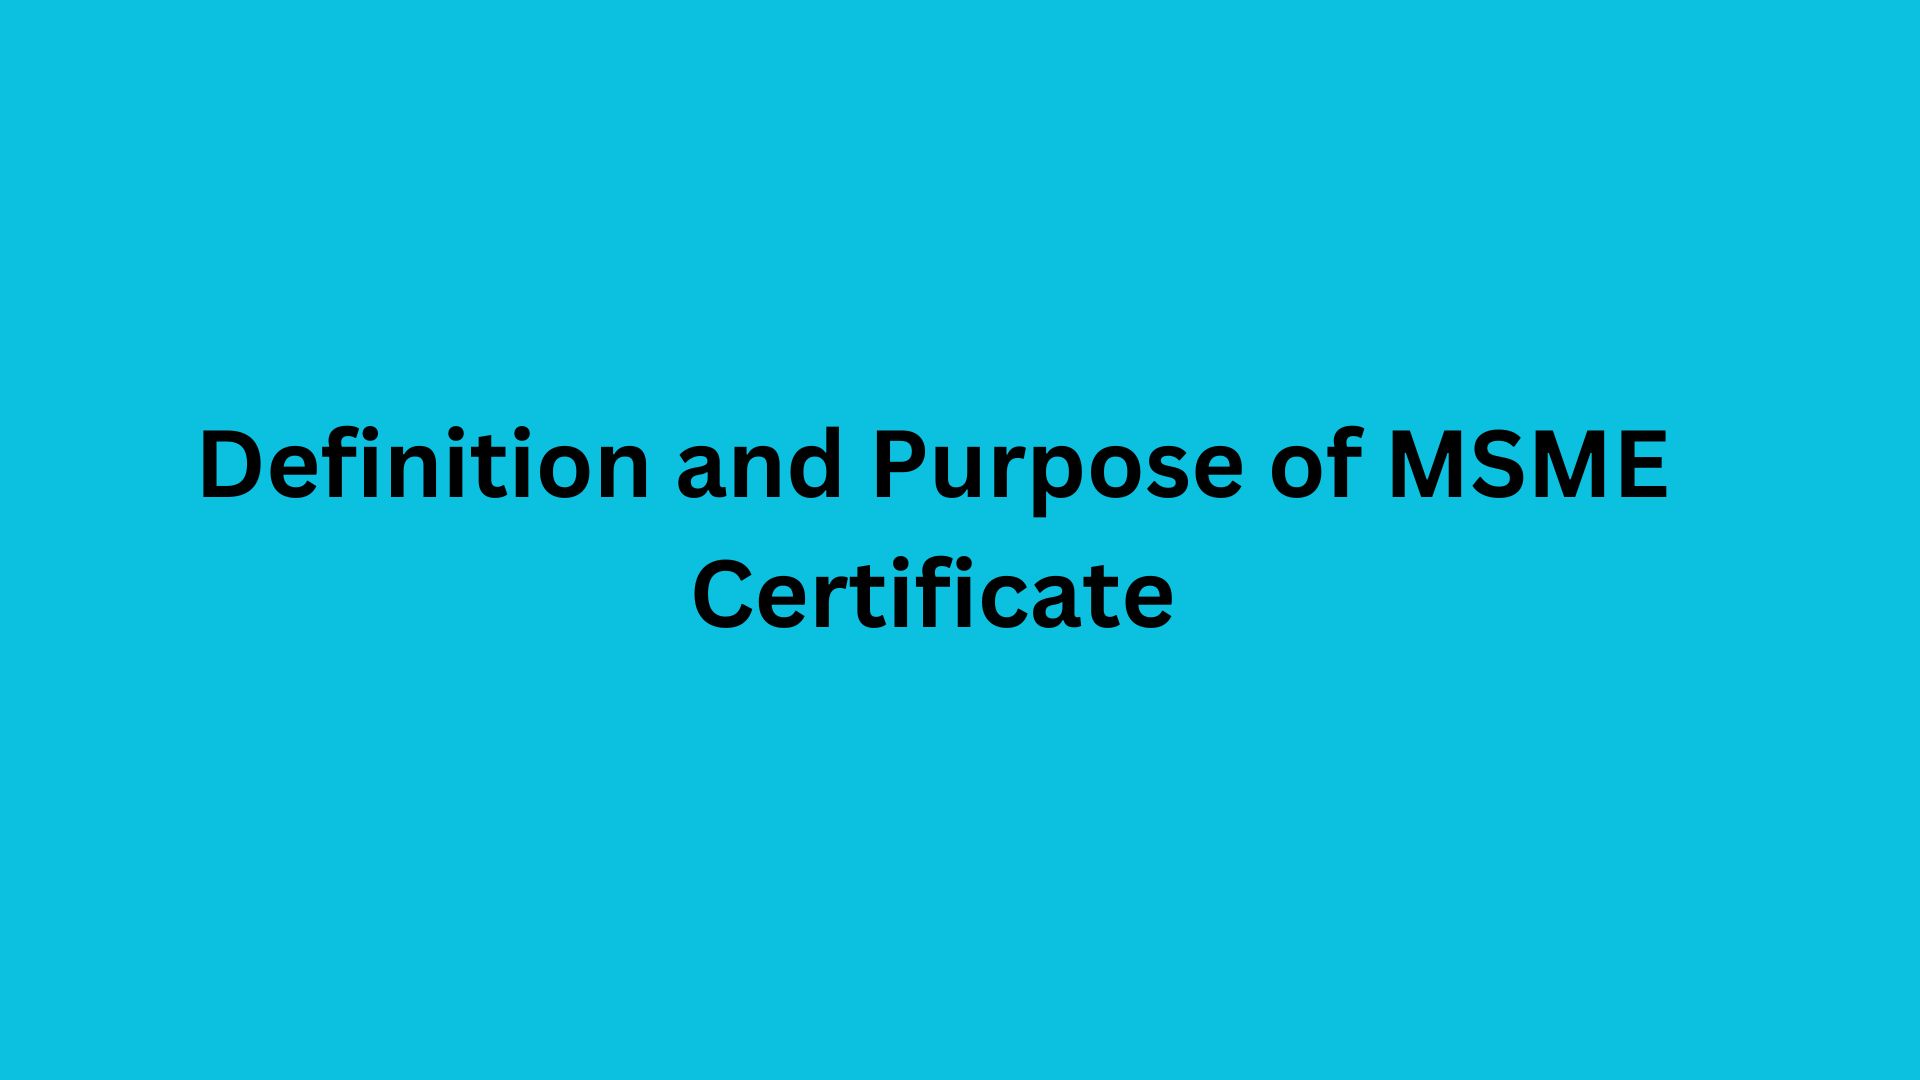 Definition and Purpose of MSME Certificate